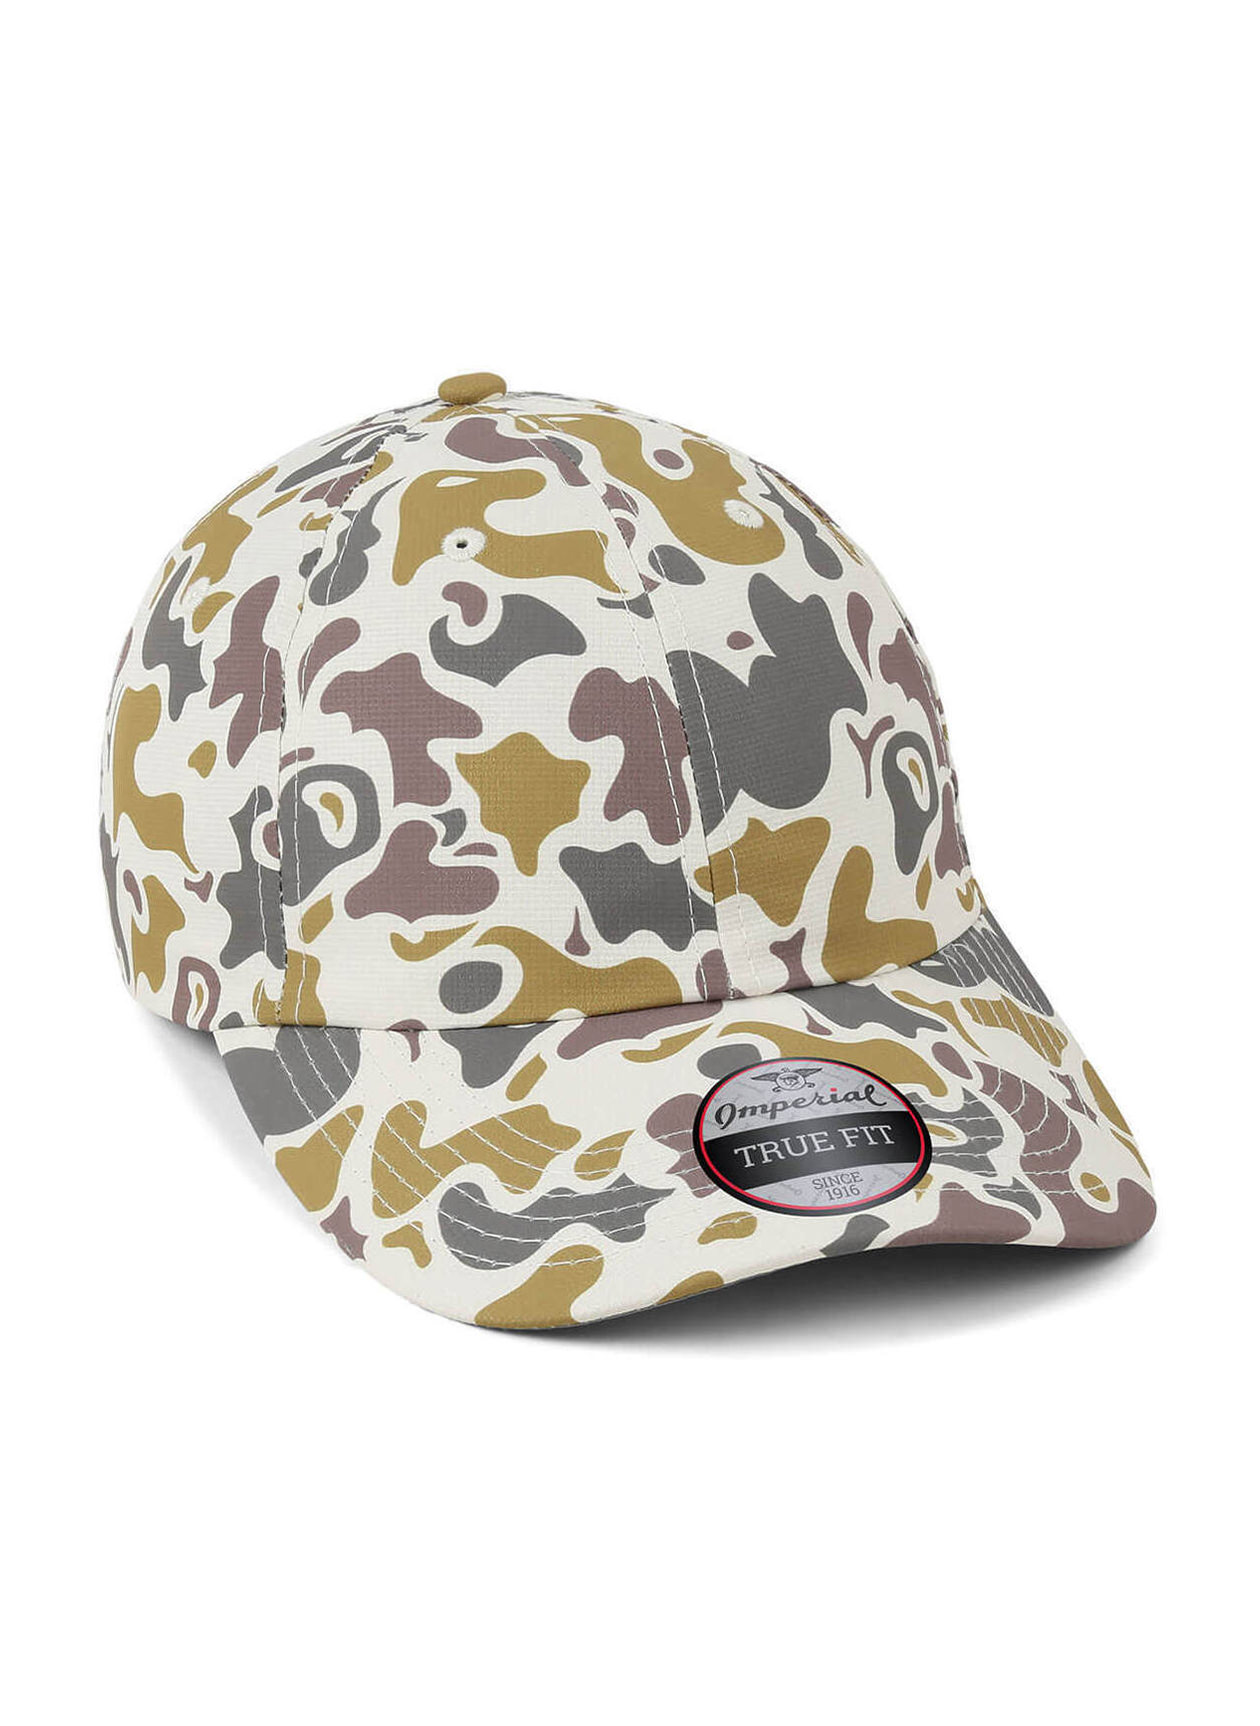 Imperial Imperian Tan Duck Camo The Alter Ego Pattered Performance Hat